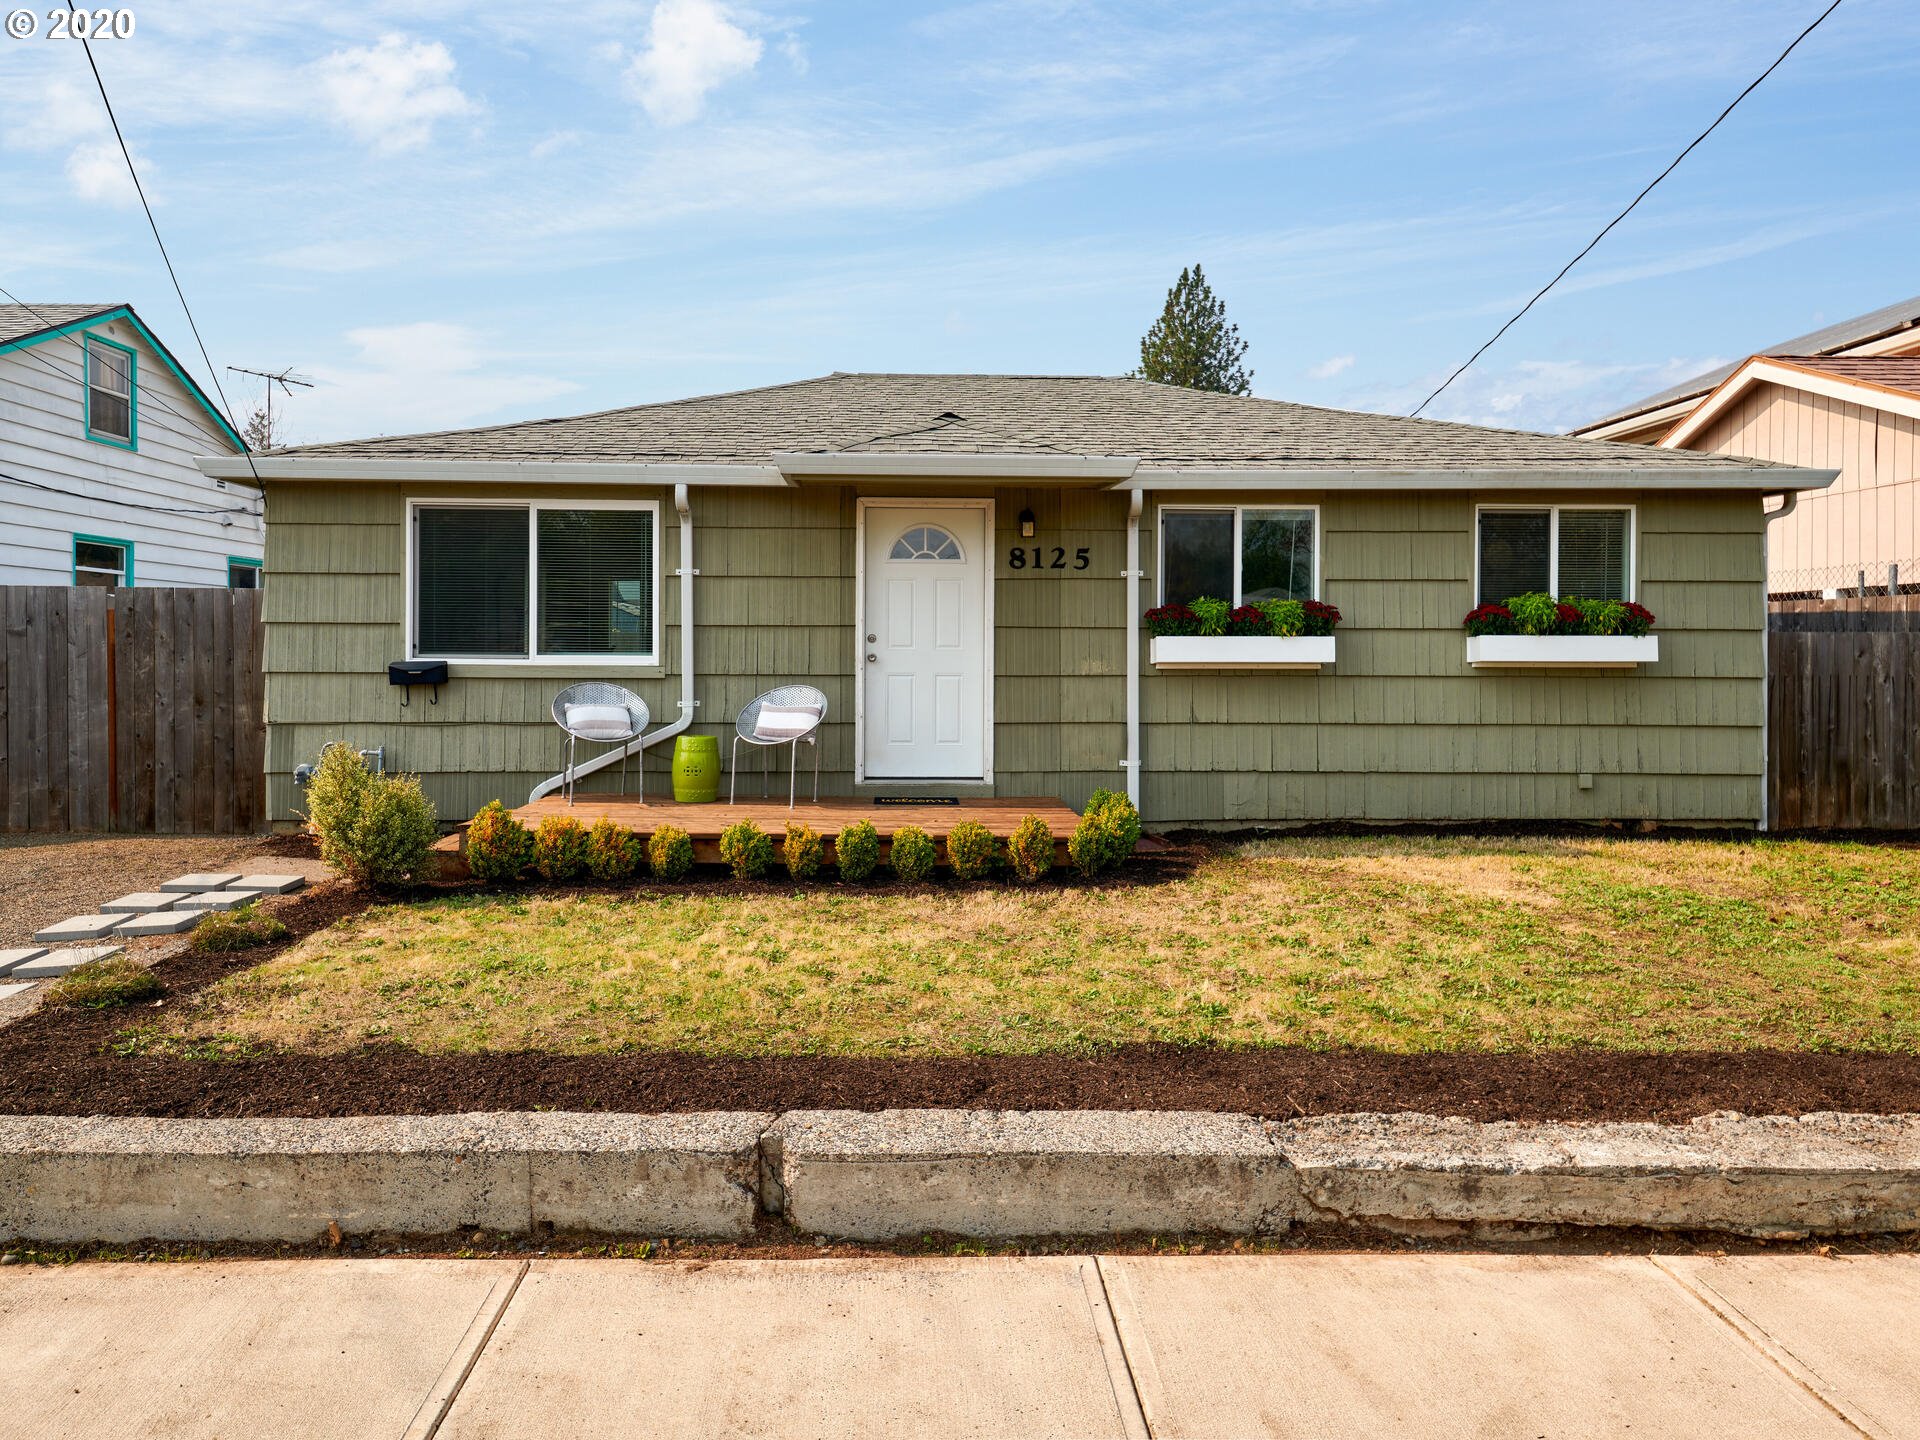 8125 SE 65TH AVE (1 of 19)